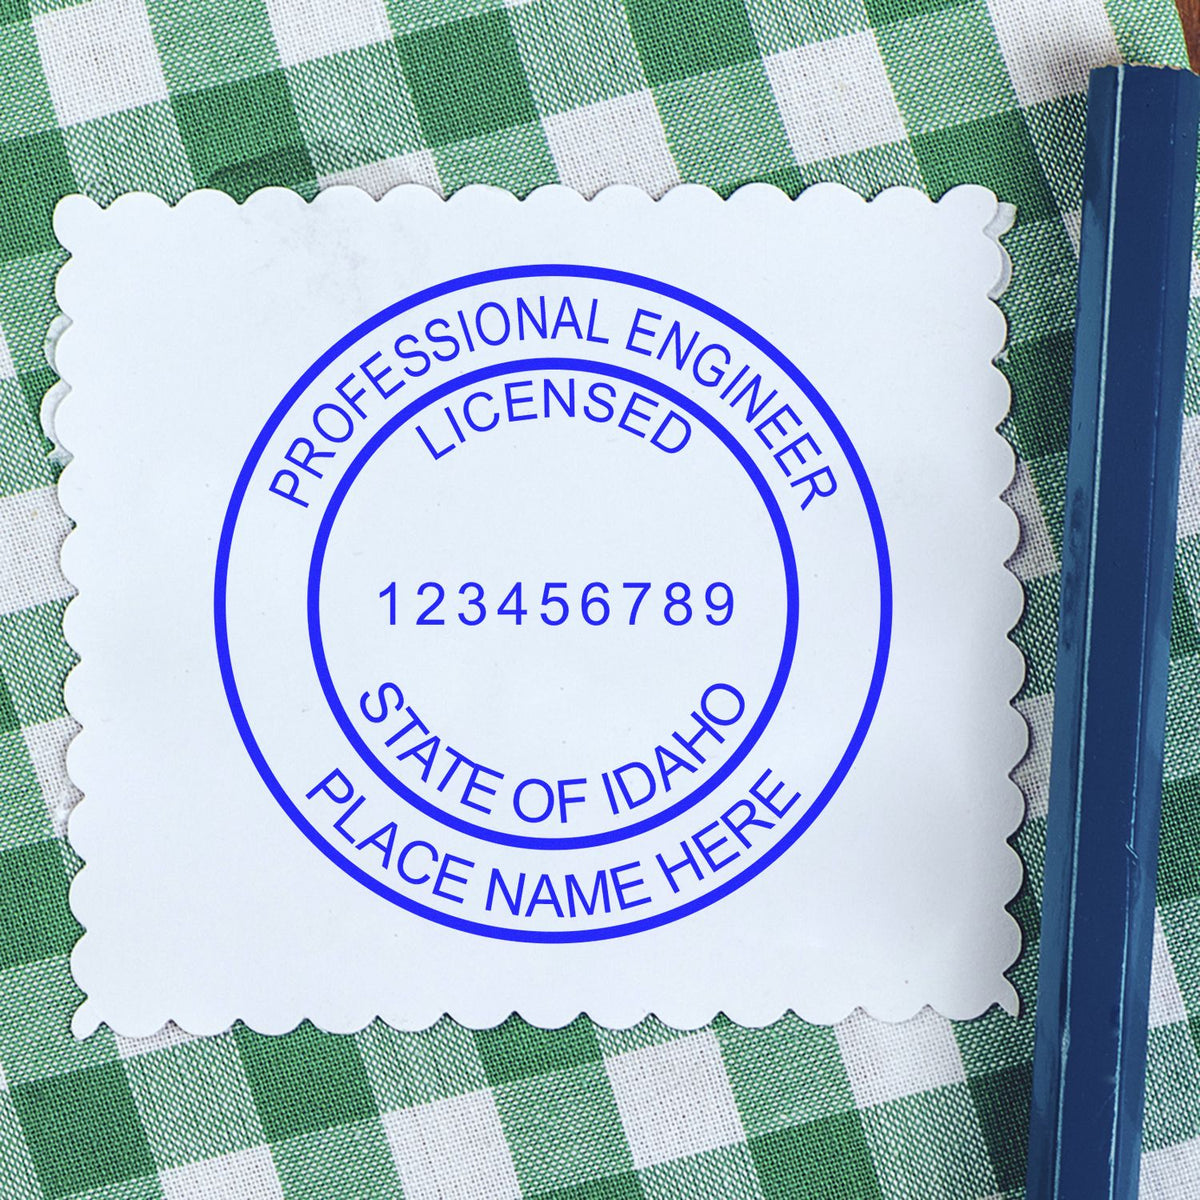 The Digital Idaho PE Stamp and Electronic Seal for Idaho Engineer stamp impression comes to life with a crisp, detailed photo on paper - showcasing true professional quality.